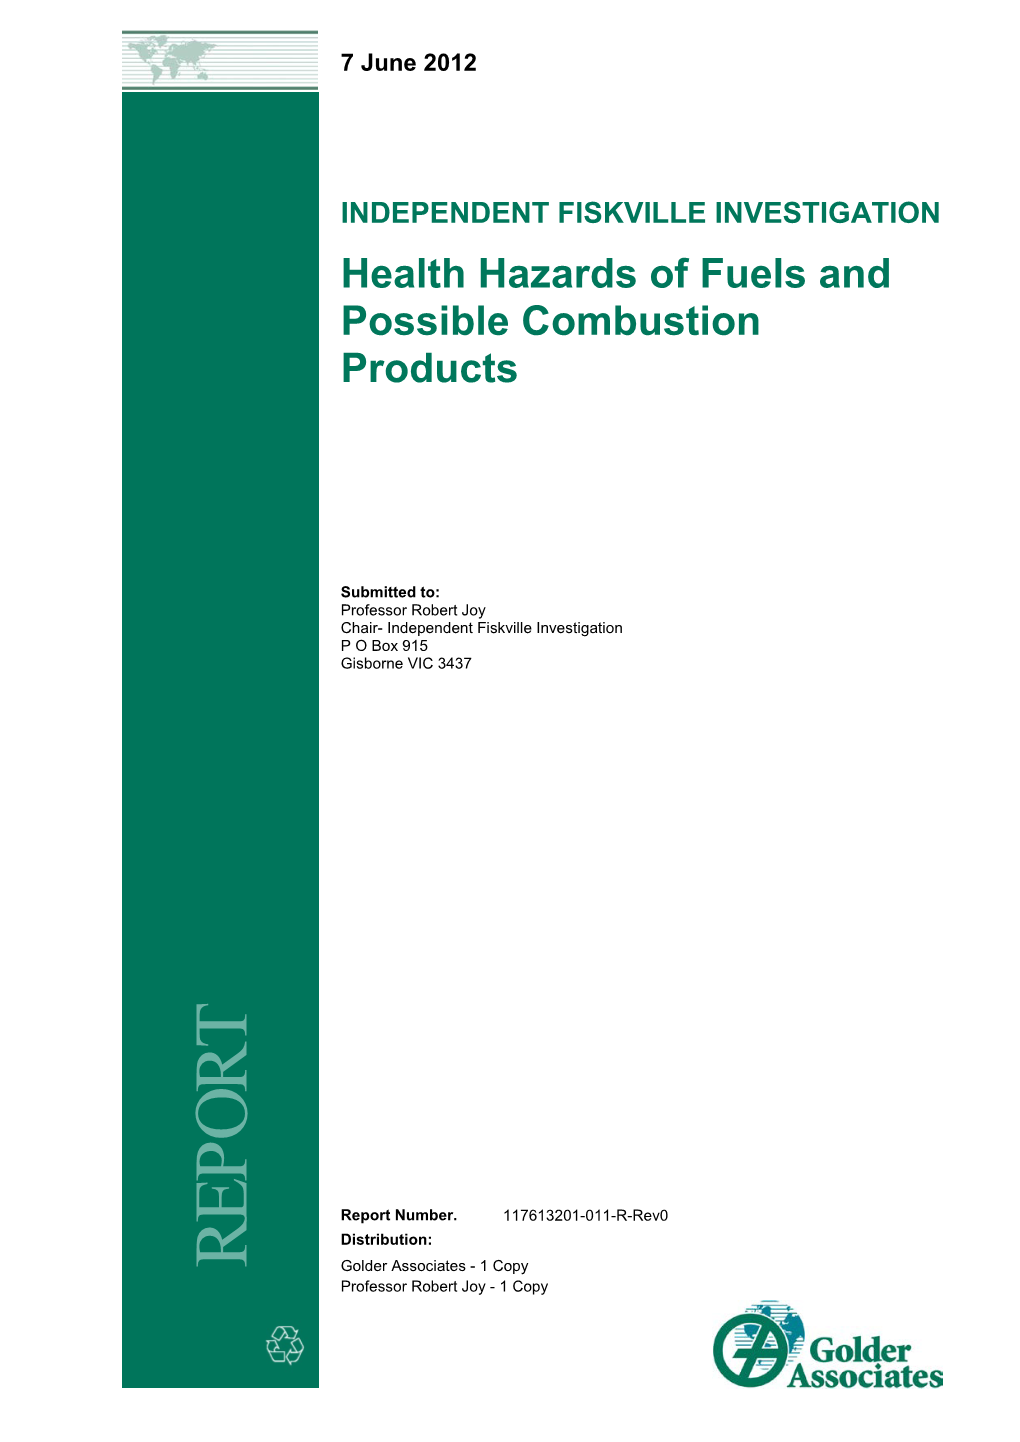 Health Hazards of Fuels and Possible Combustion Products